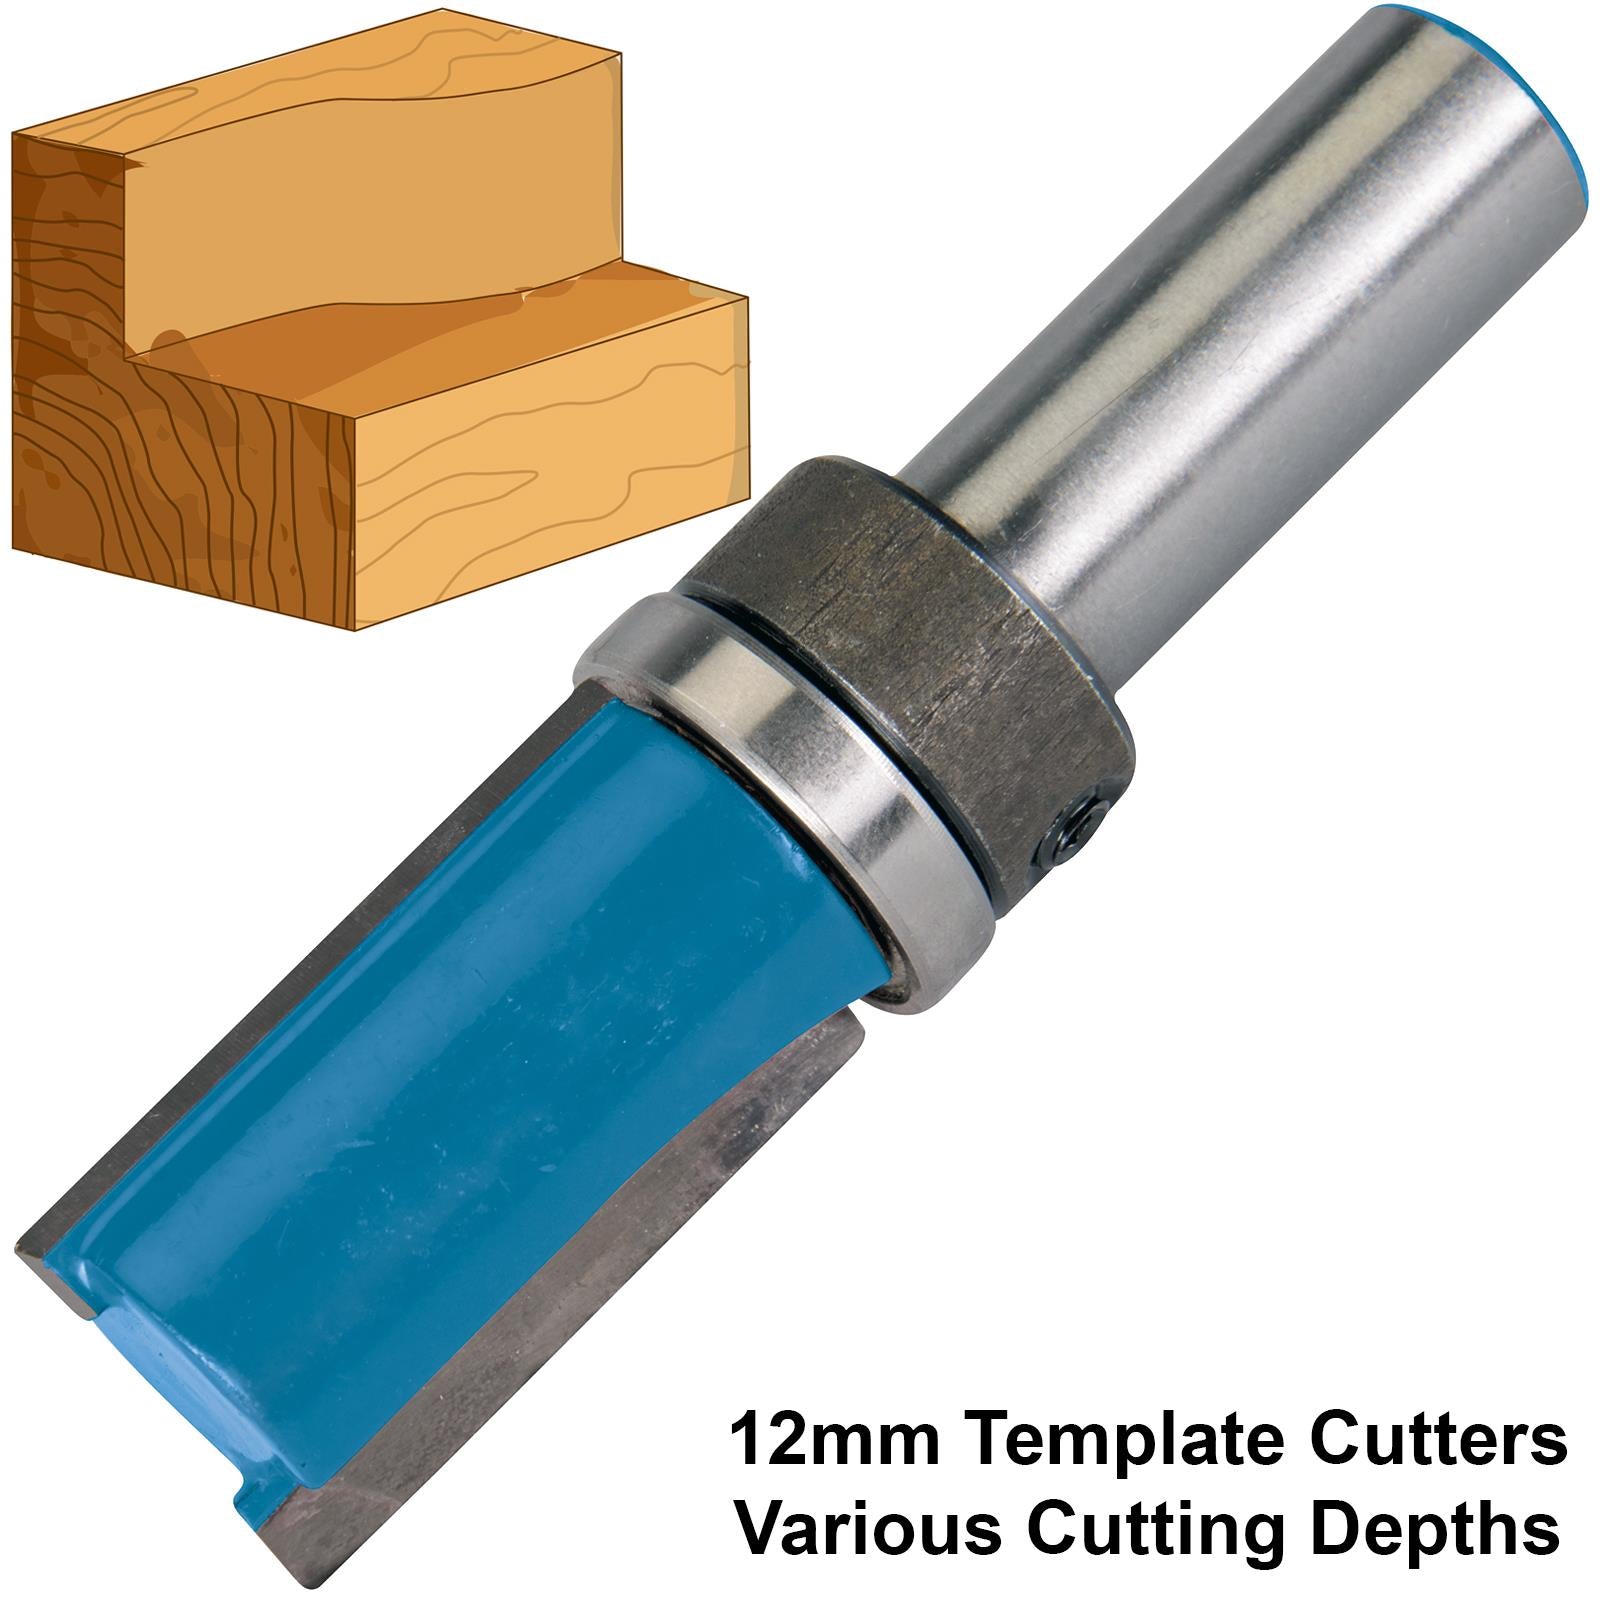 Silverline 12mm Template Router Cutters